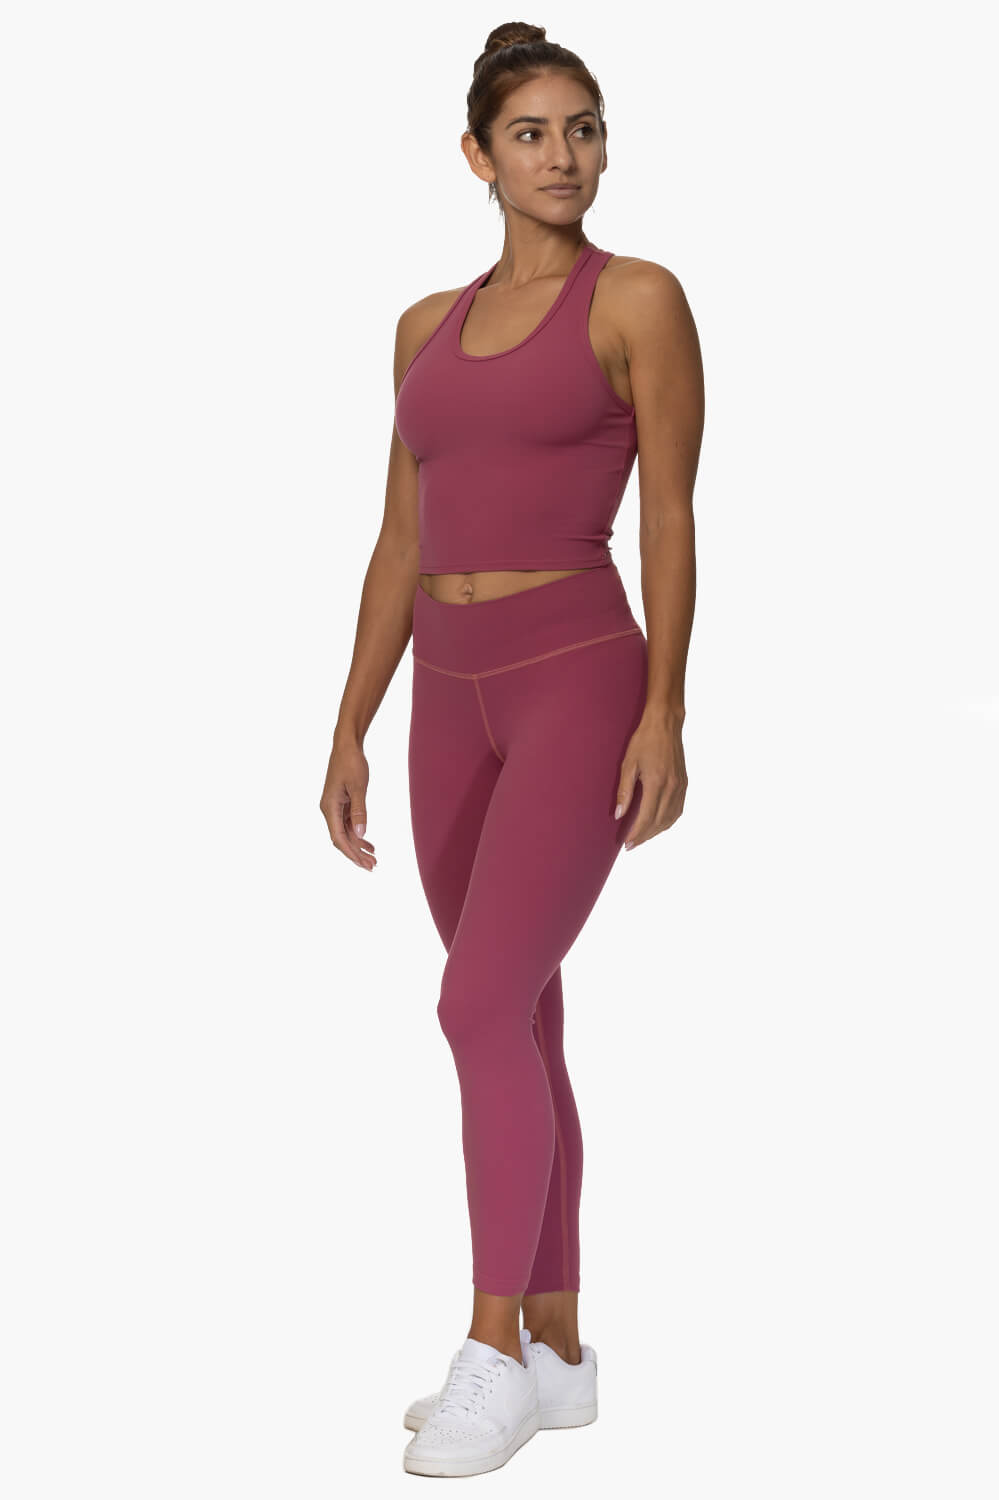 Women's Buttery Soft Activewear Leggings with Pockets (Small only) -  Wholesale 